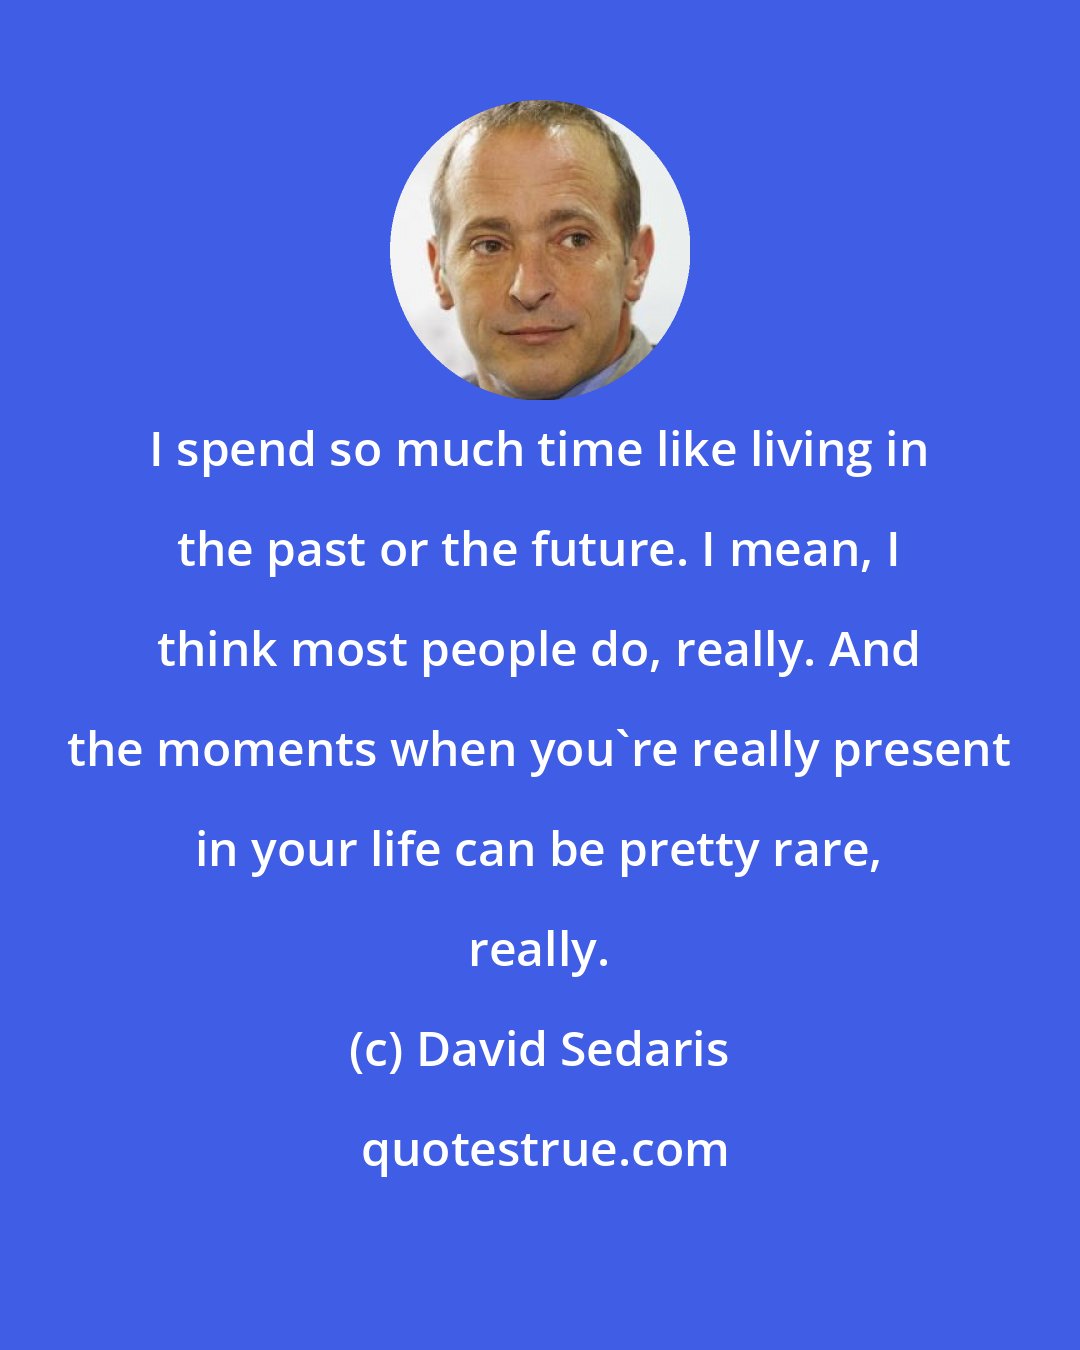 David Sedaris: I spend so much time like living in the past or the future. I mean, I think most people do, really. And the moments when you're really present in your life can be pretty rare, really.